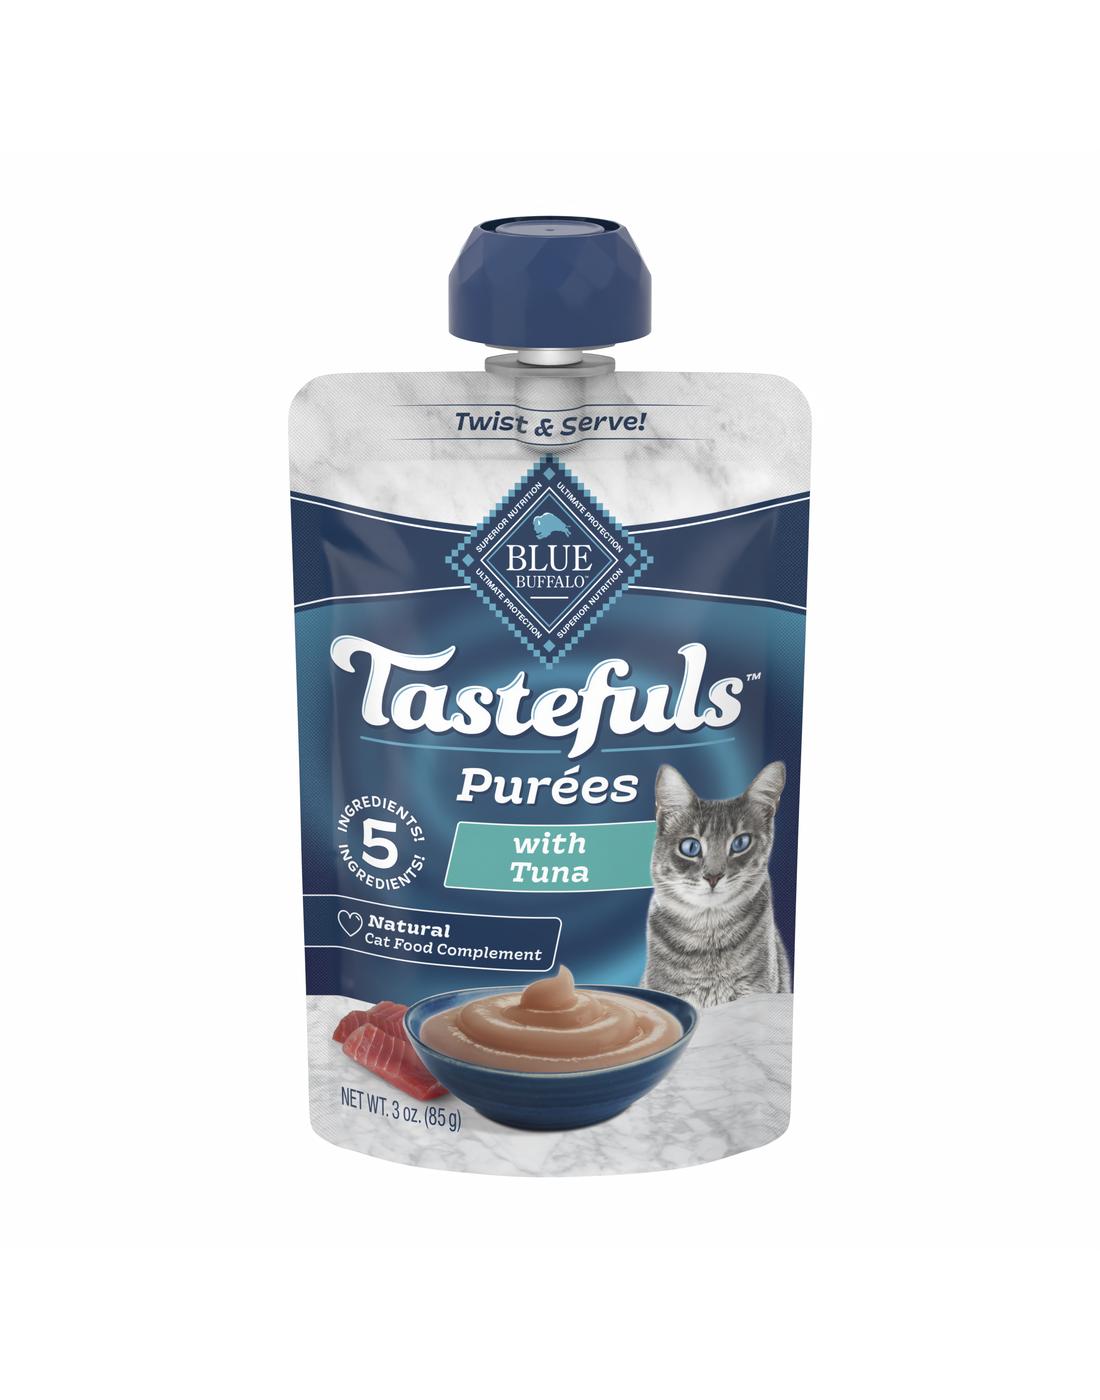 Blue Buffalo Tastefuls Purees Tuna Wet Cat Food Complement; image 1 of 2